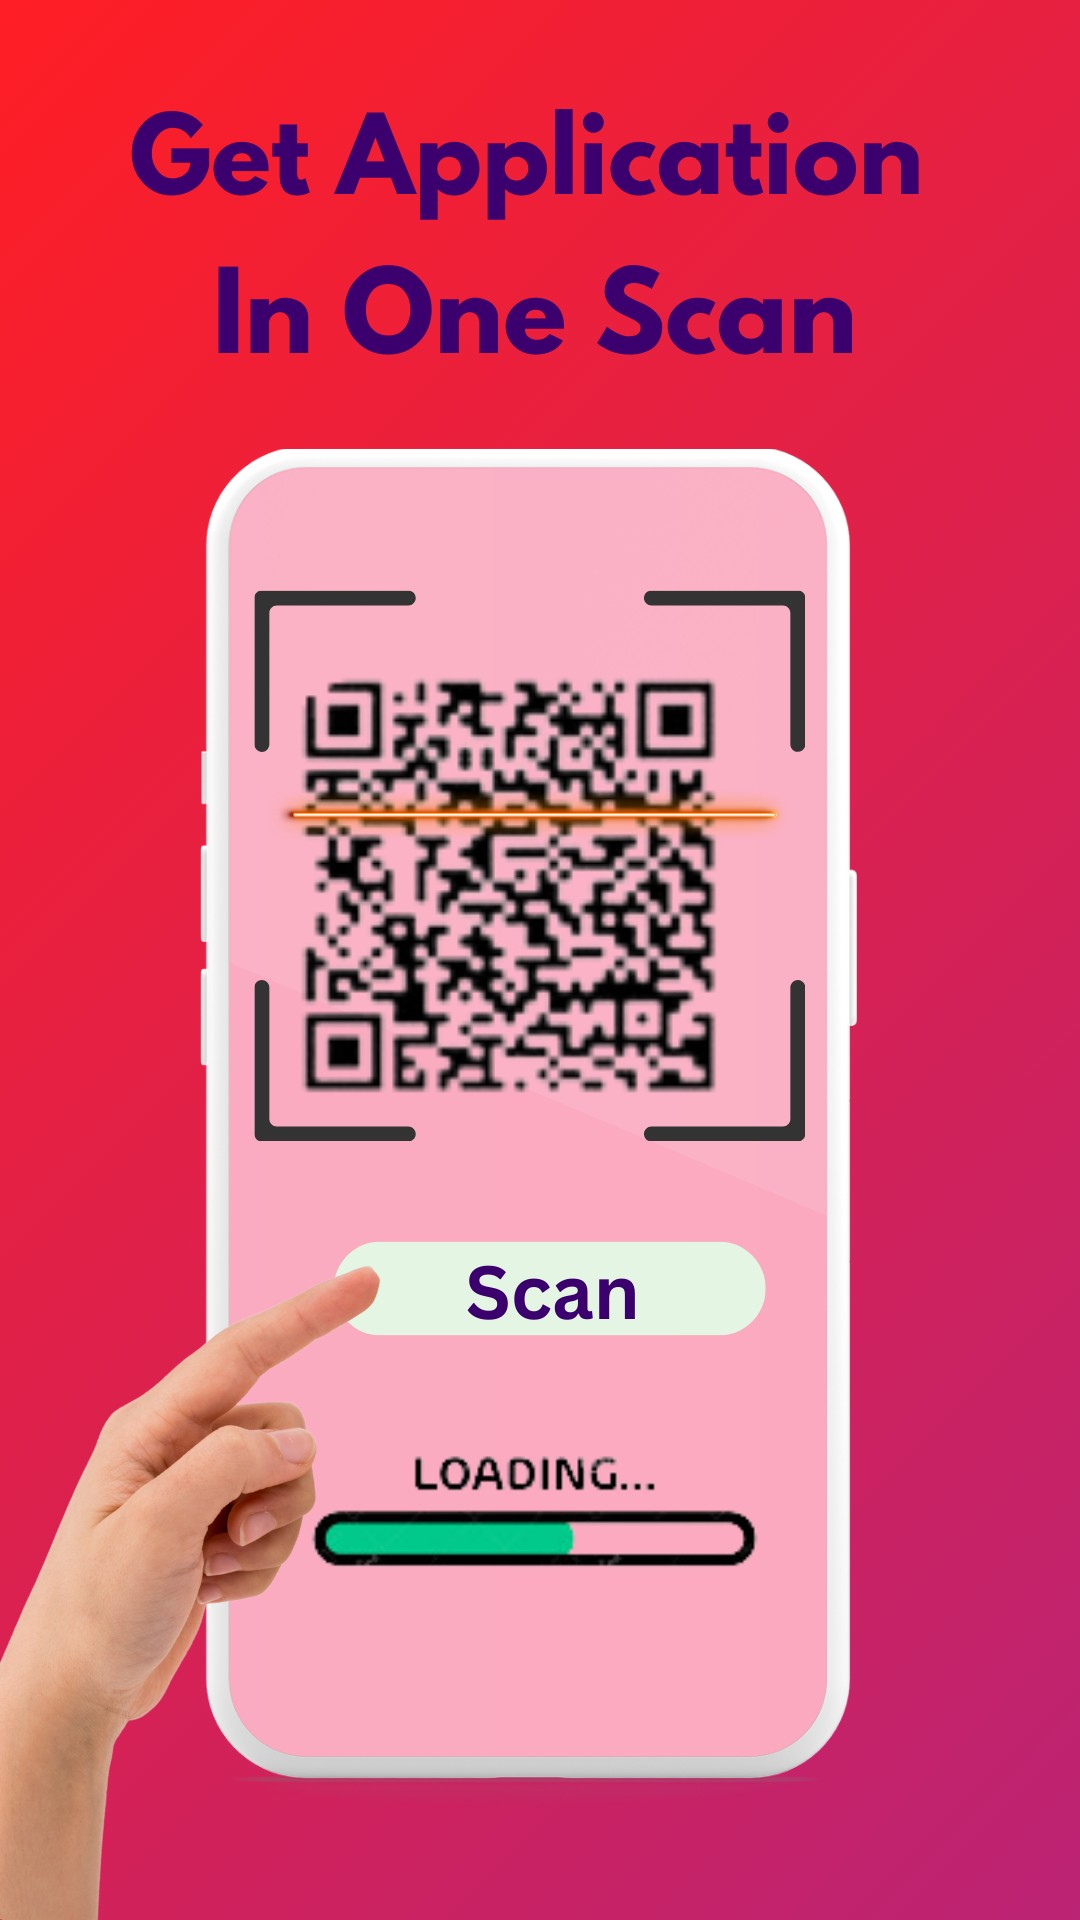 Get Application In One Scan